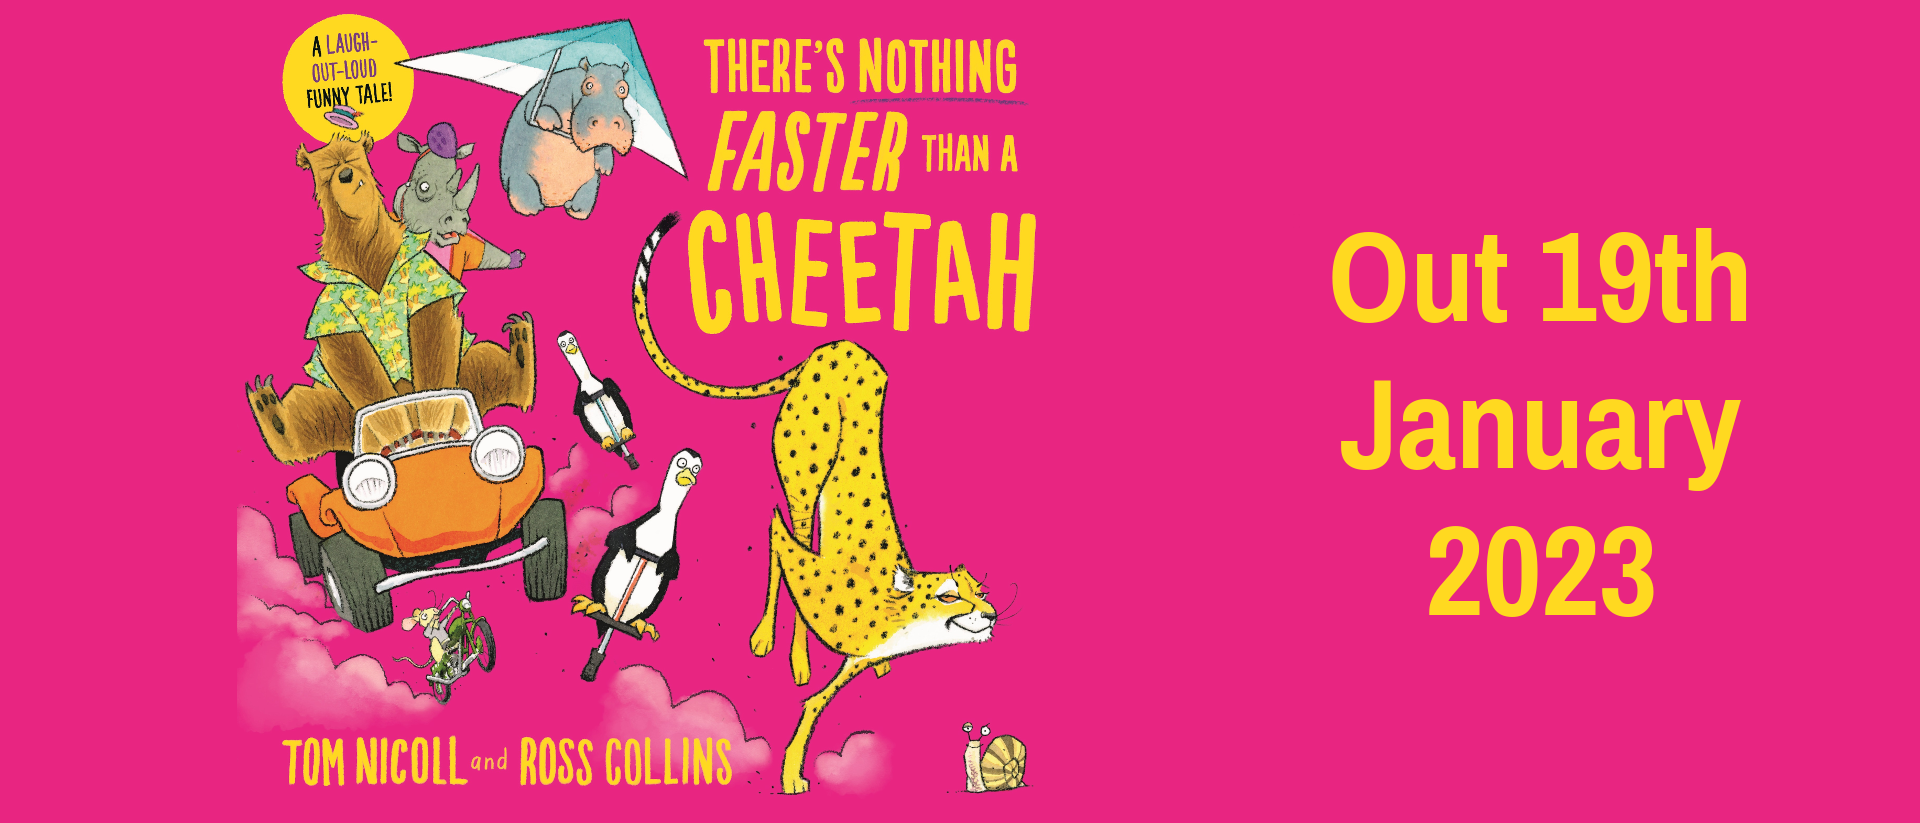 There's Nothing Faster Than A Cheetah by Tom Nicoll and Ross Collins. Out January 19th 2003.